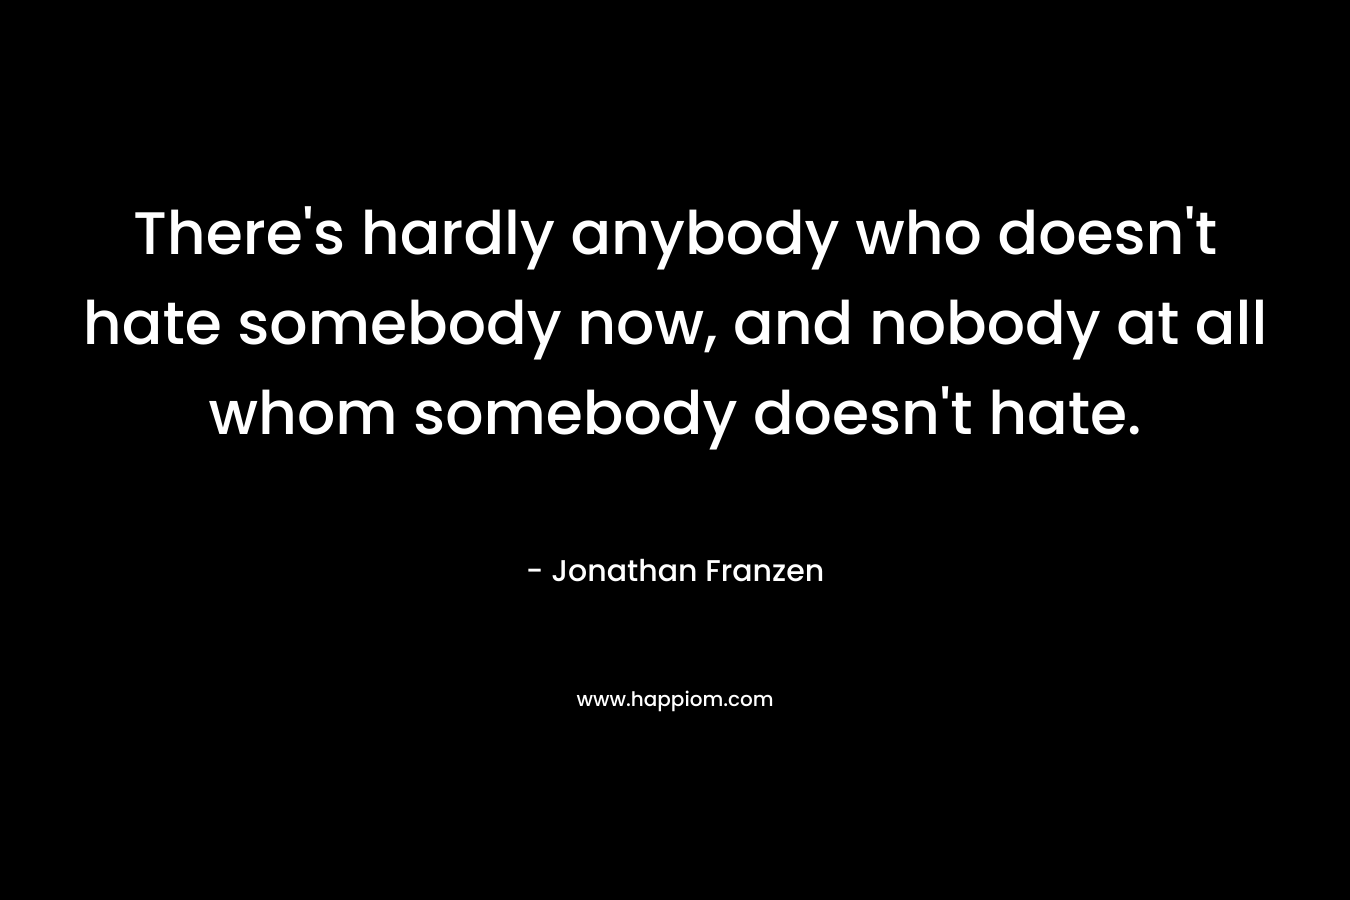 There's hardly anybody who doesn't hate somebody now, and nobody at all whom somebody doesn't hate.